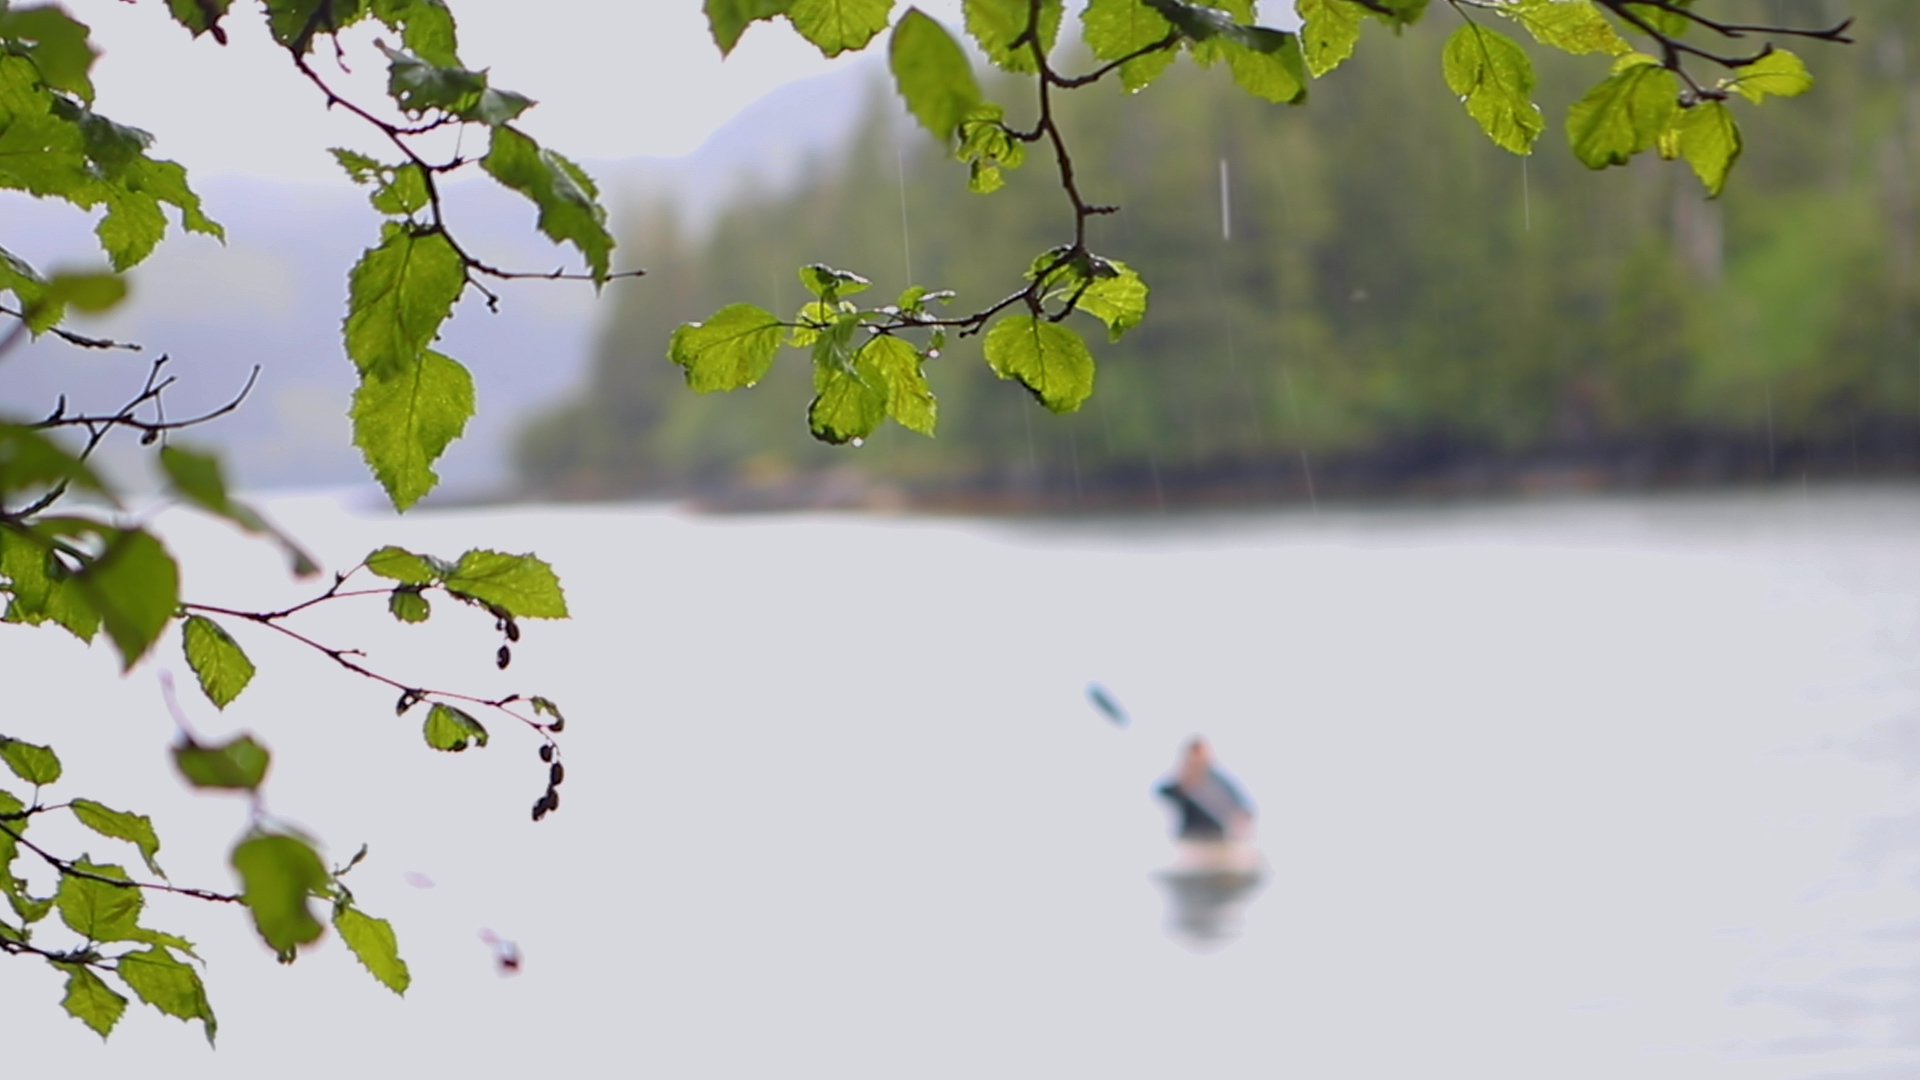 An out-of-focus kayaker paddles on calm water